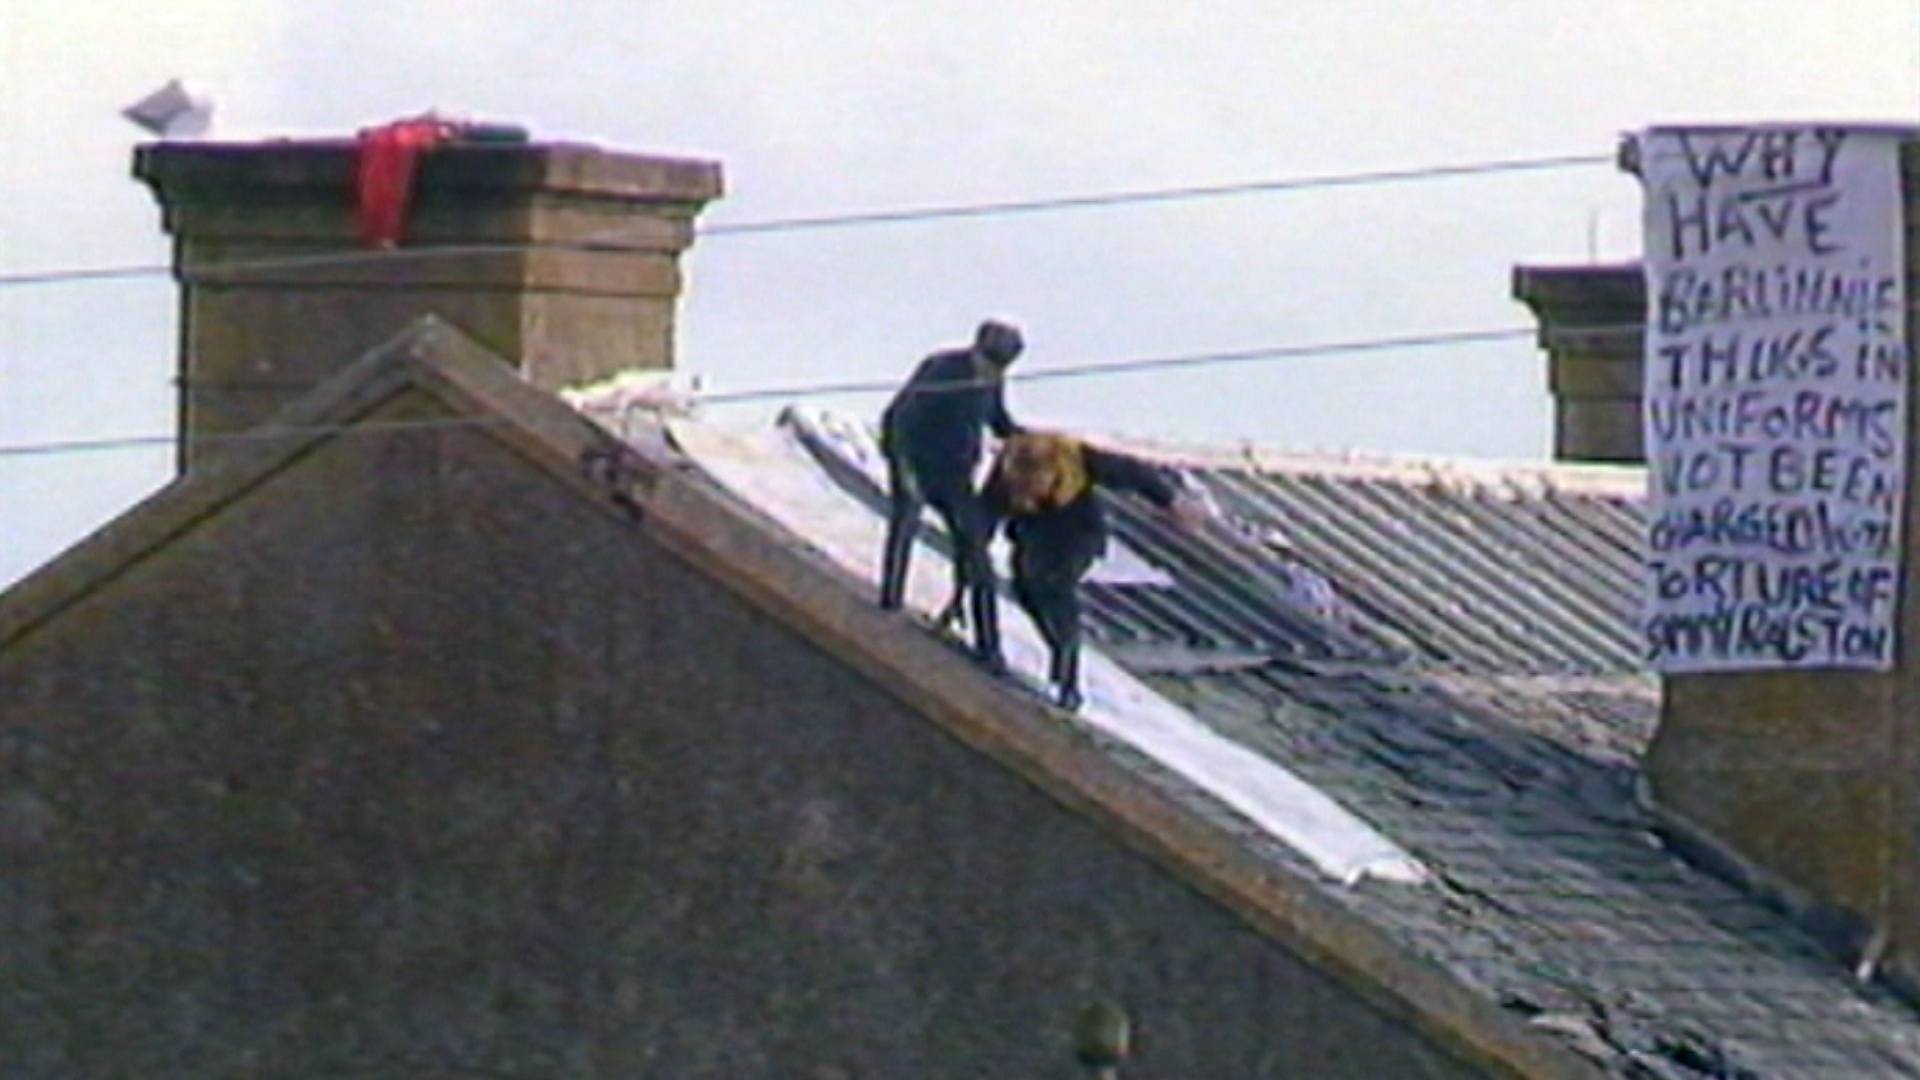 Jackie Stuart was paraded chained by the neck on the roof of what was branded the 'hate factory', housing some of Scotland’s most notorious criminals.